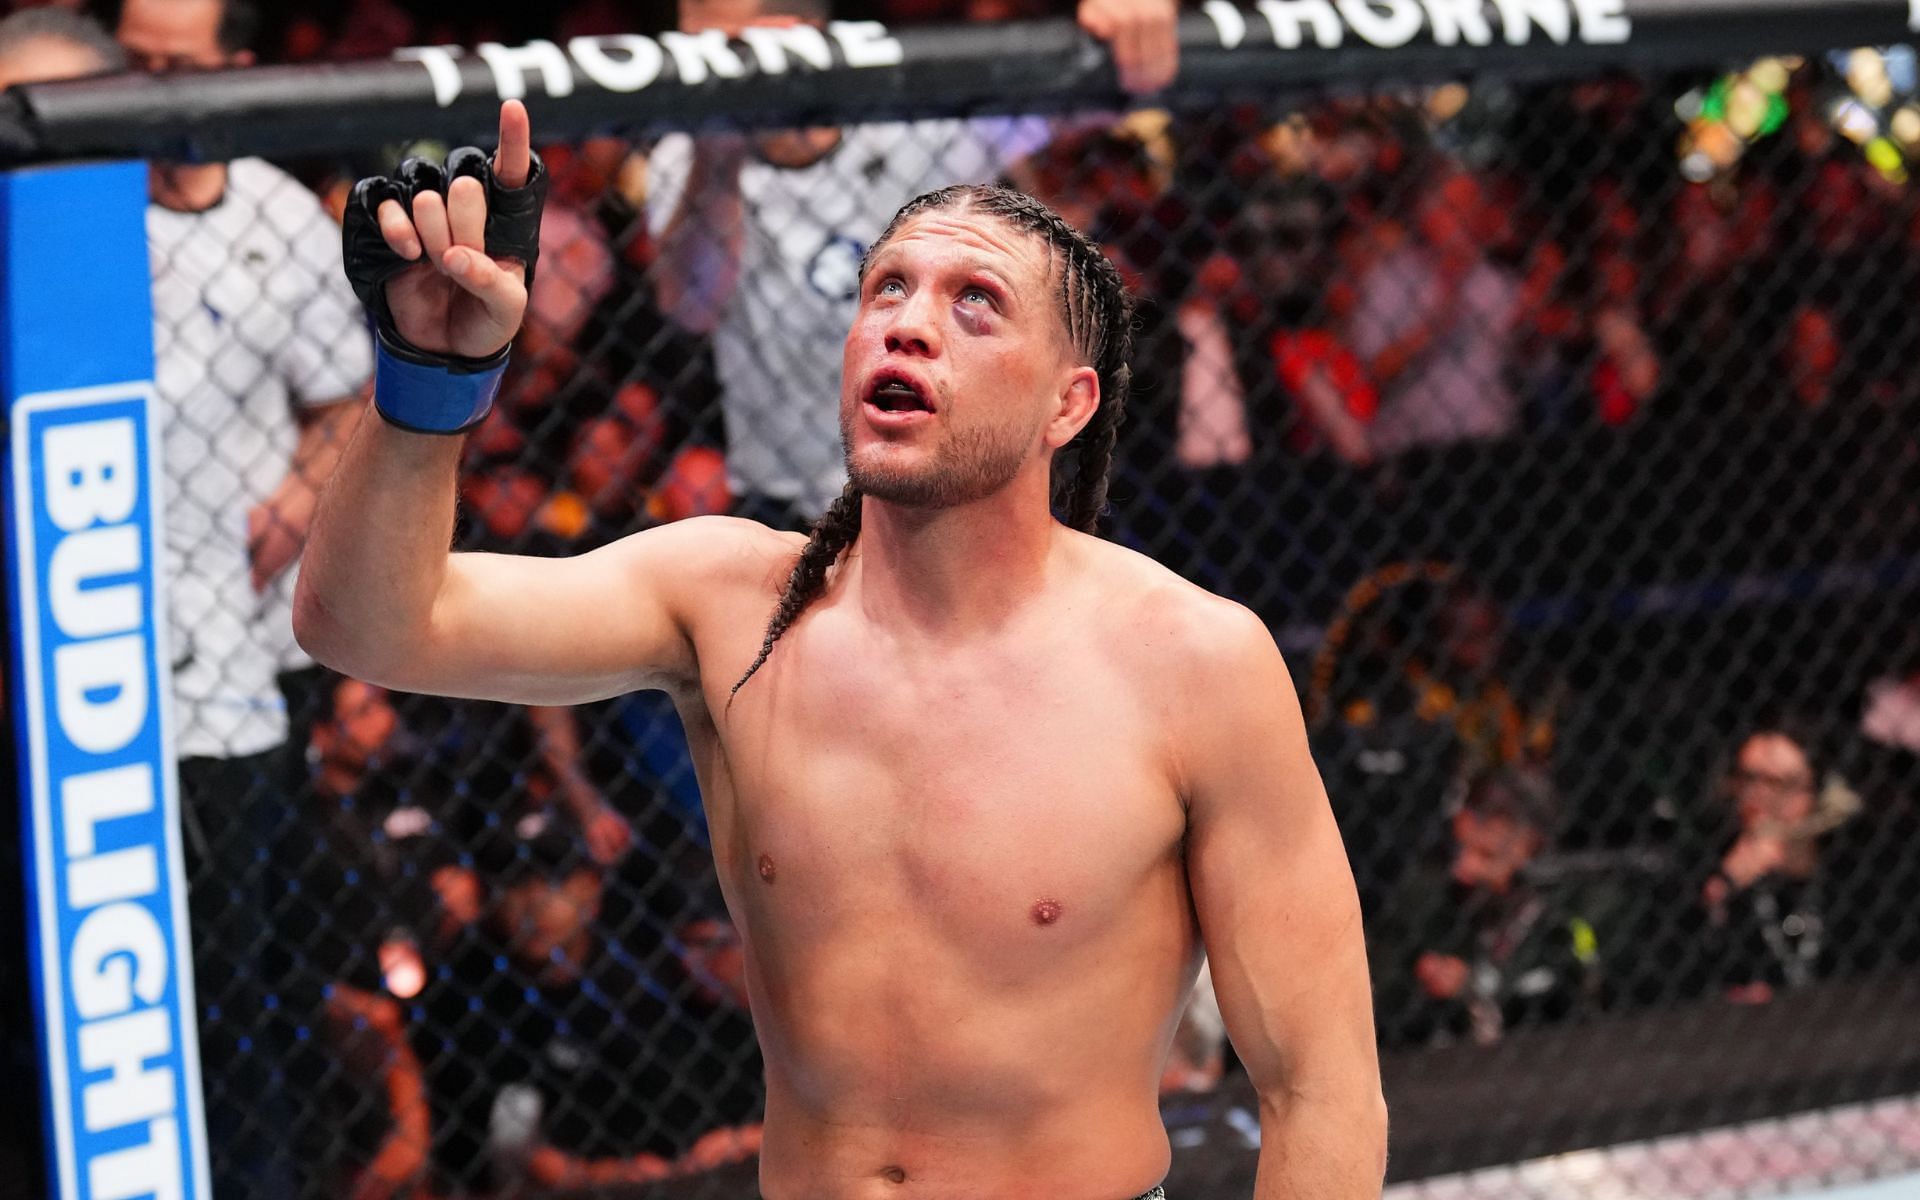 Brian Ortega was responsible for the best moment of last night